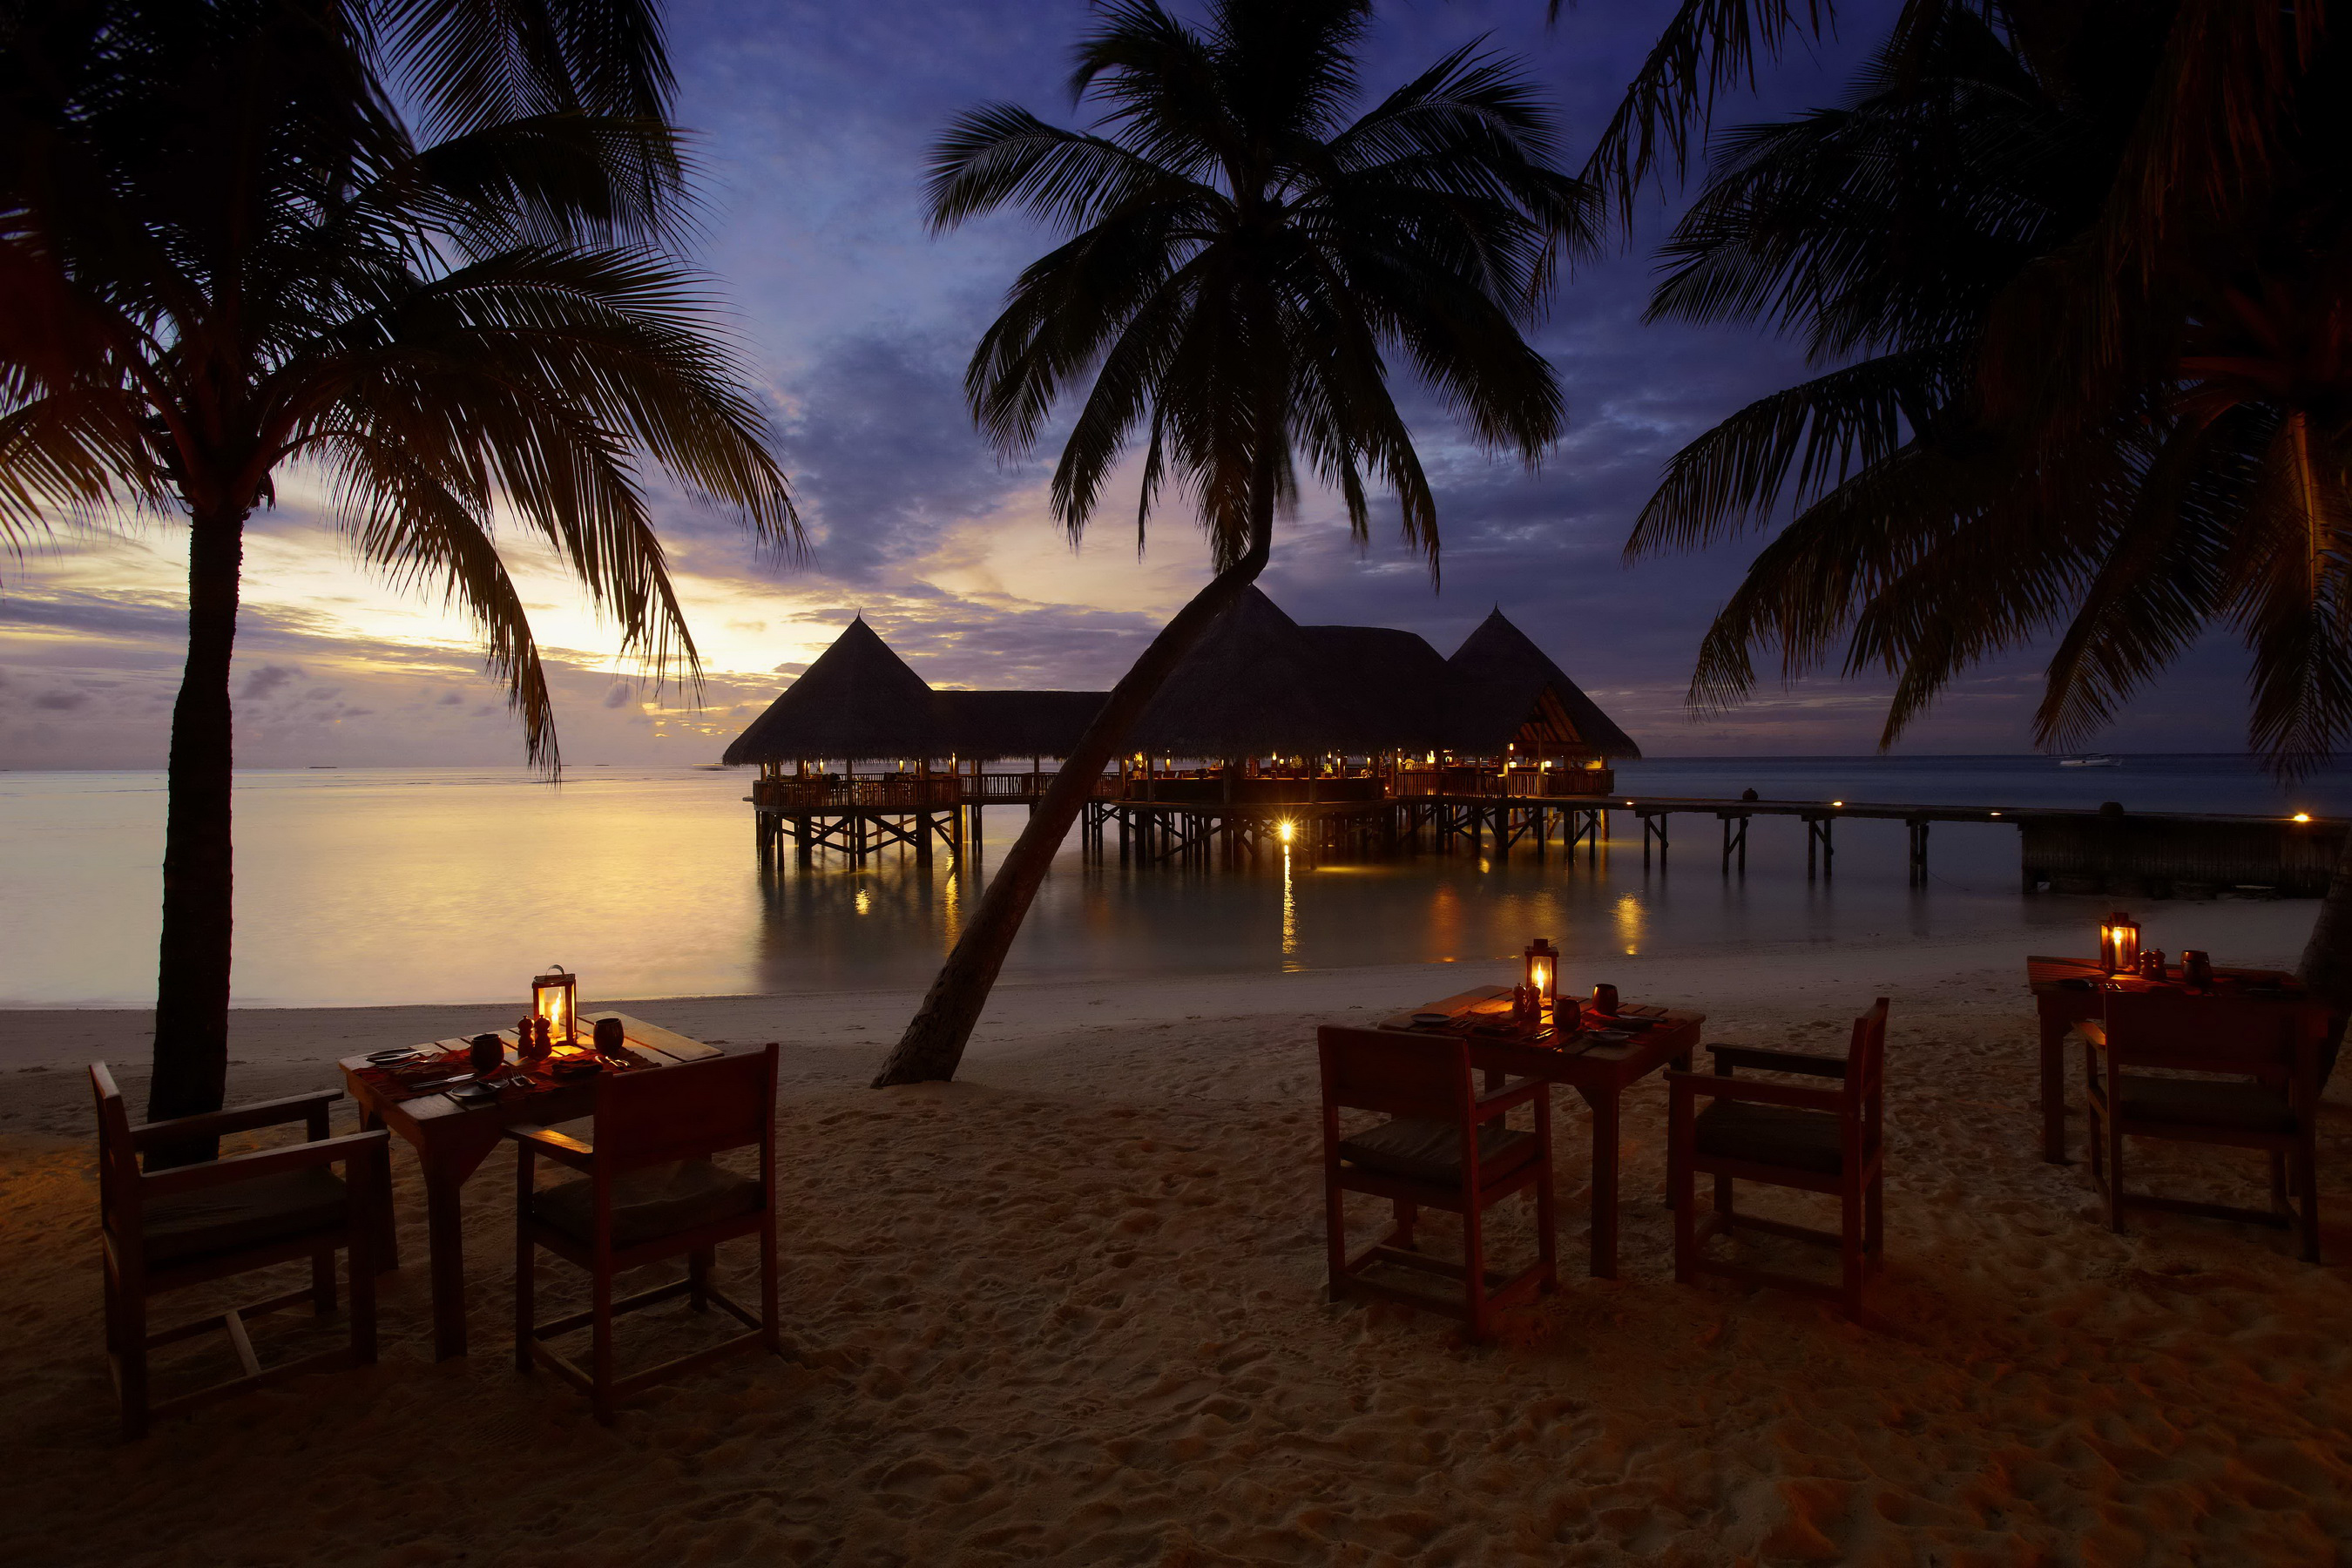 evening, maldives, beach, bungalow, photography, holiday, chair, horizon, palm tree, table QHD